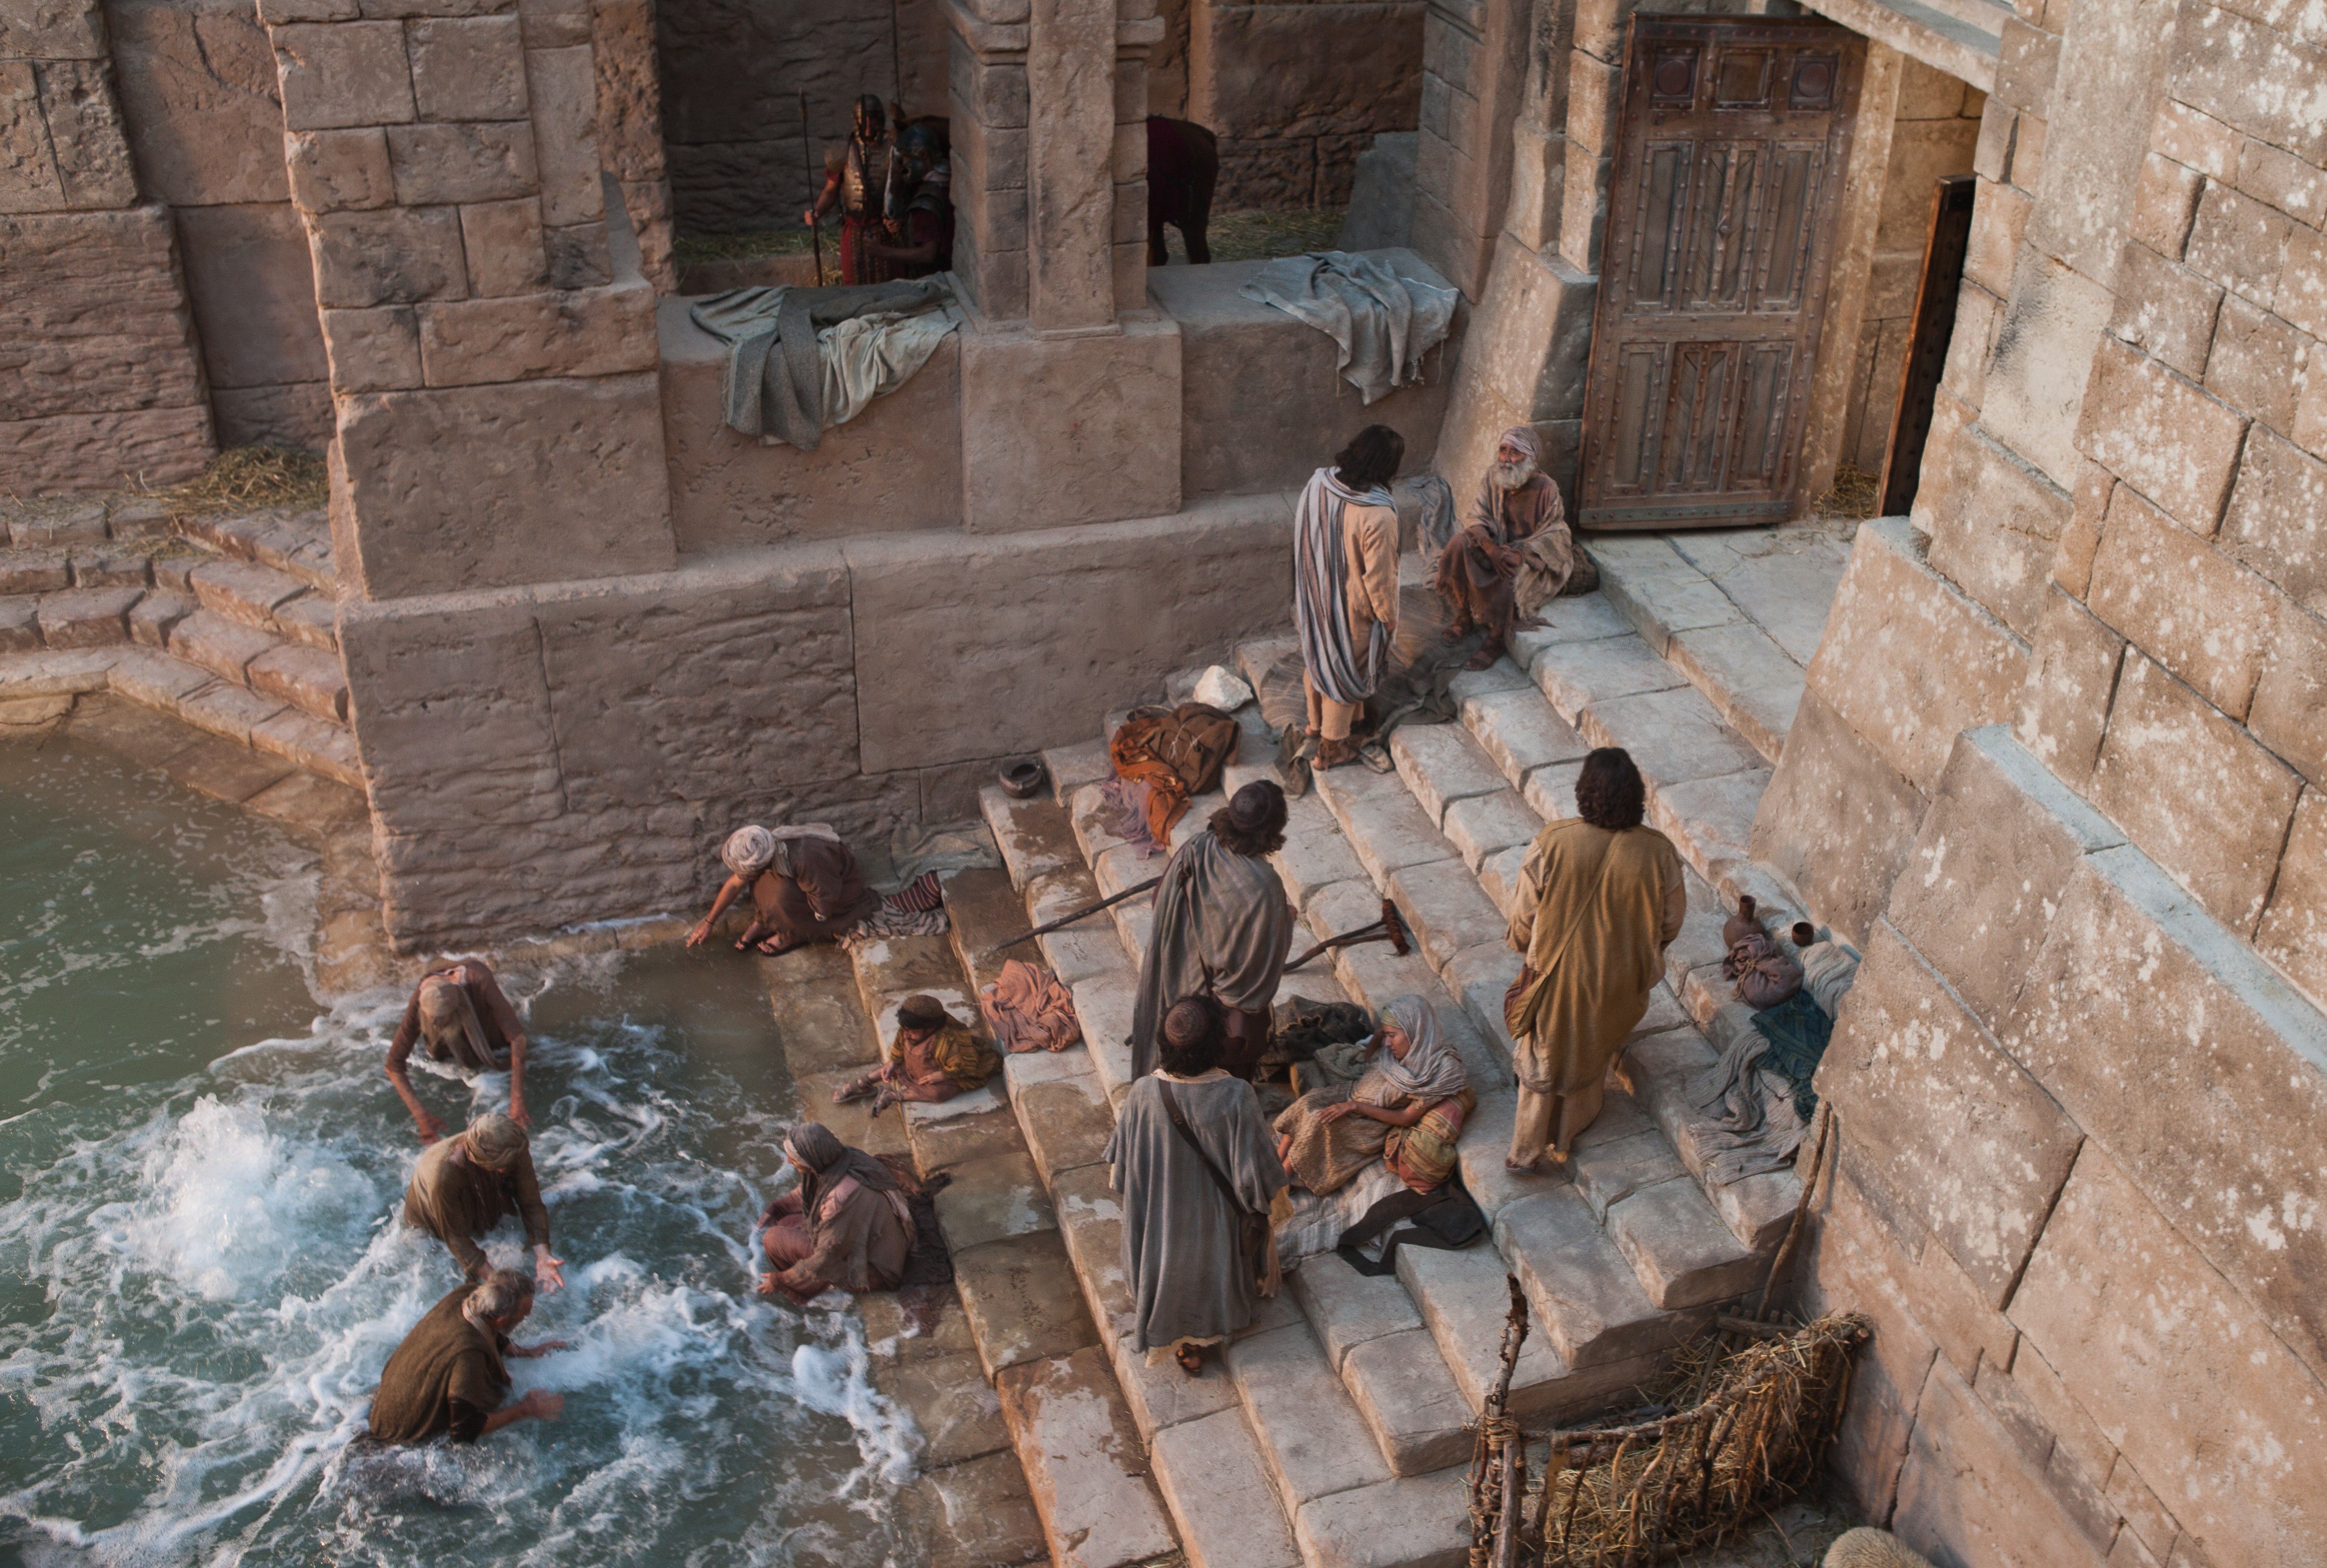 A group of people at the pool of Bethesda trying to be first to enter the water.